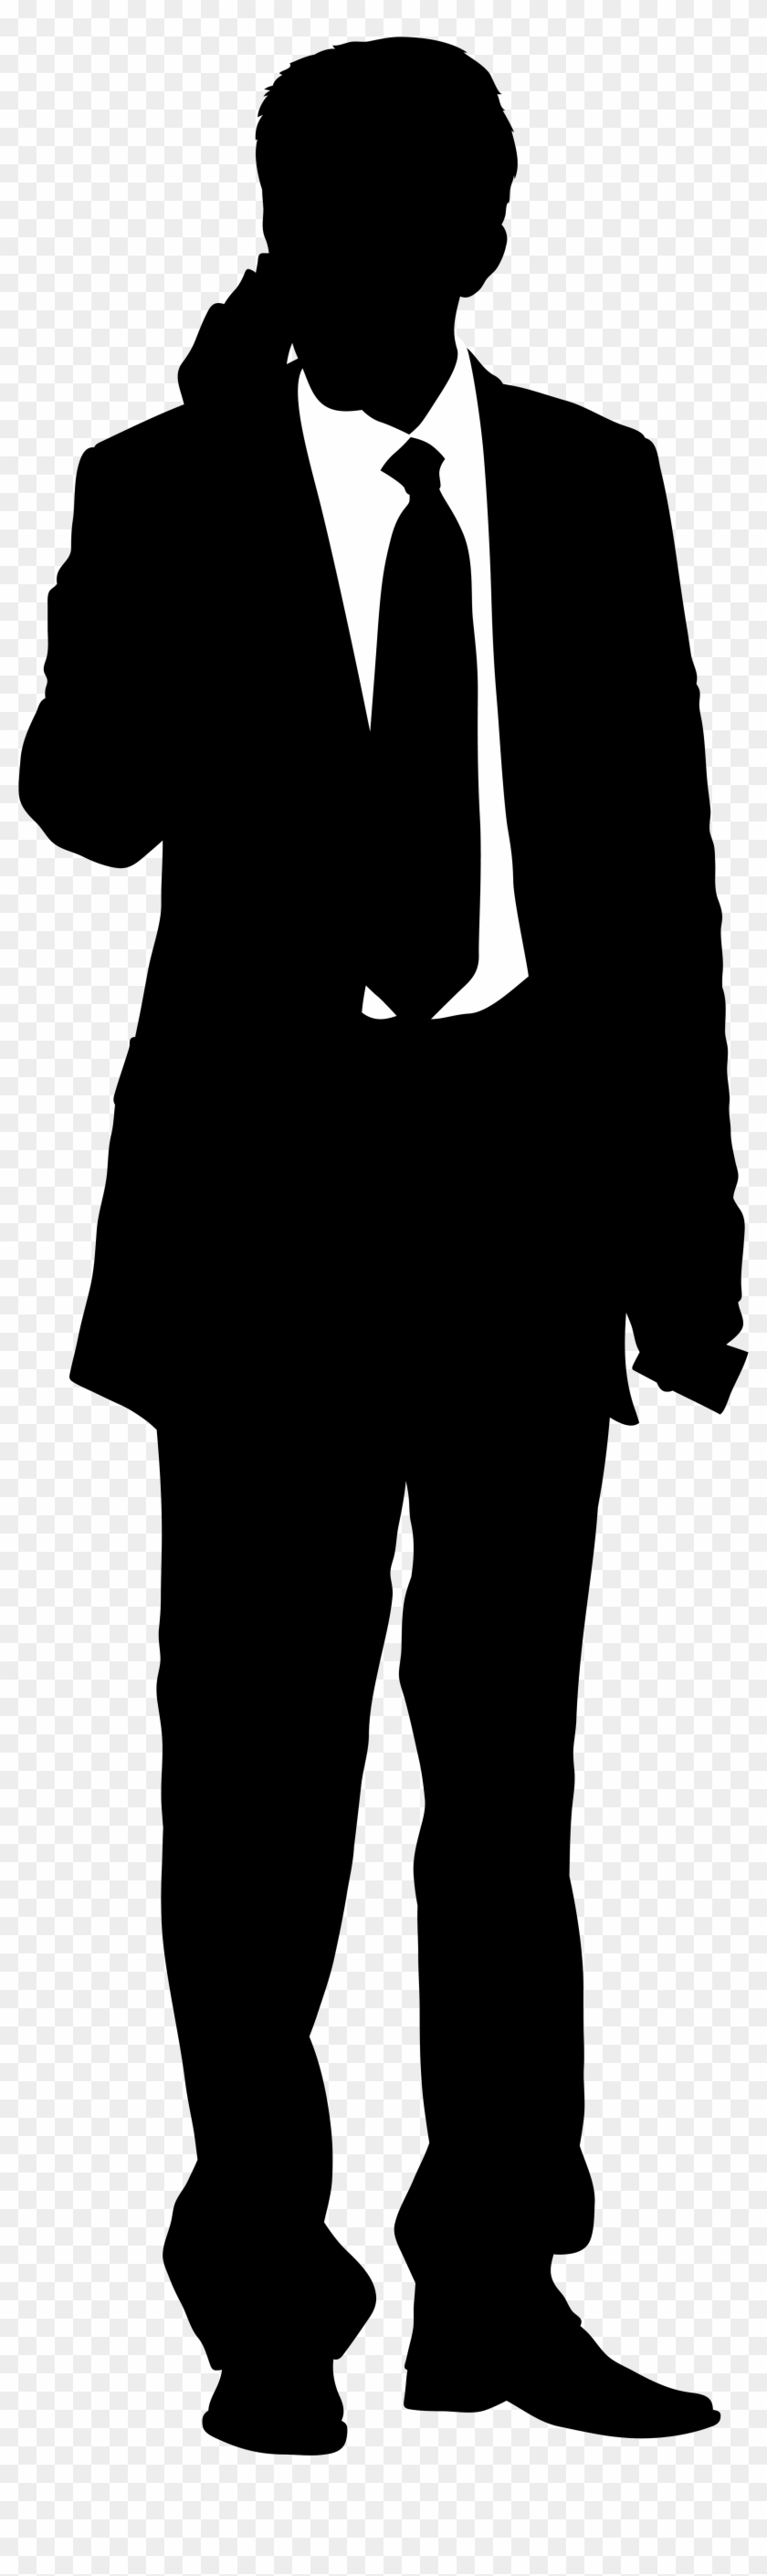 Free Png Businessman Silhouette Png - Business Silhouettes Clipart #324952